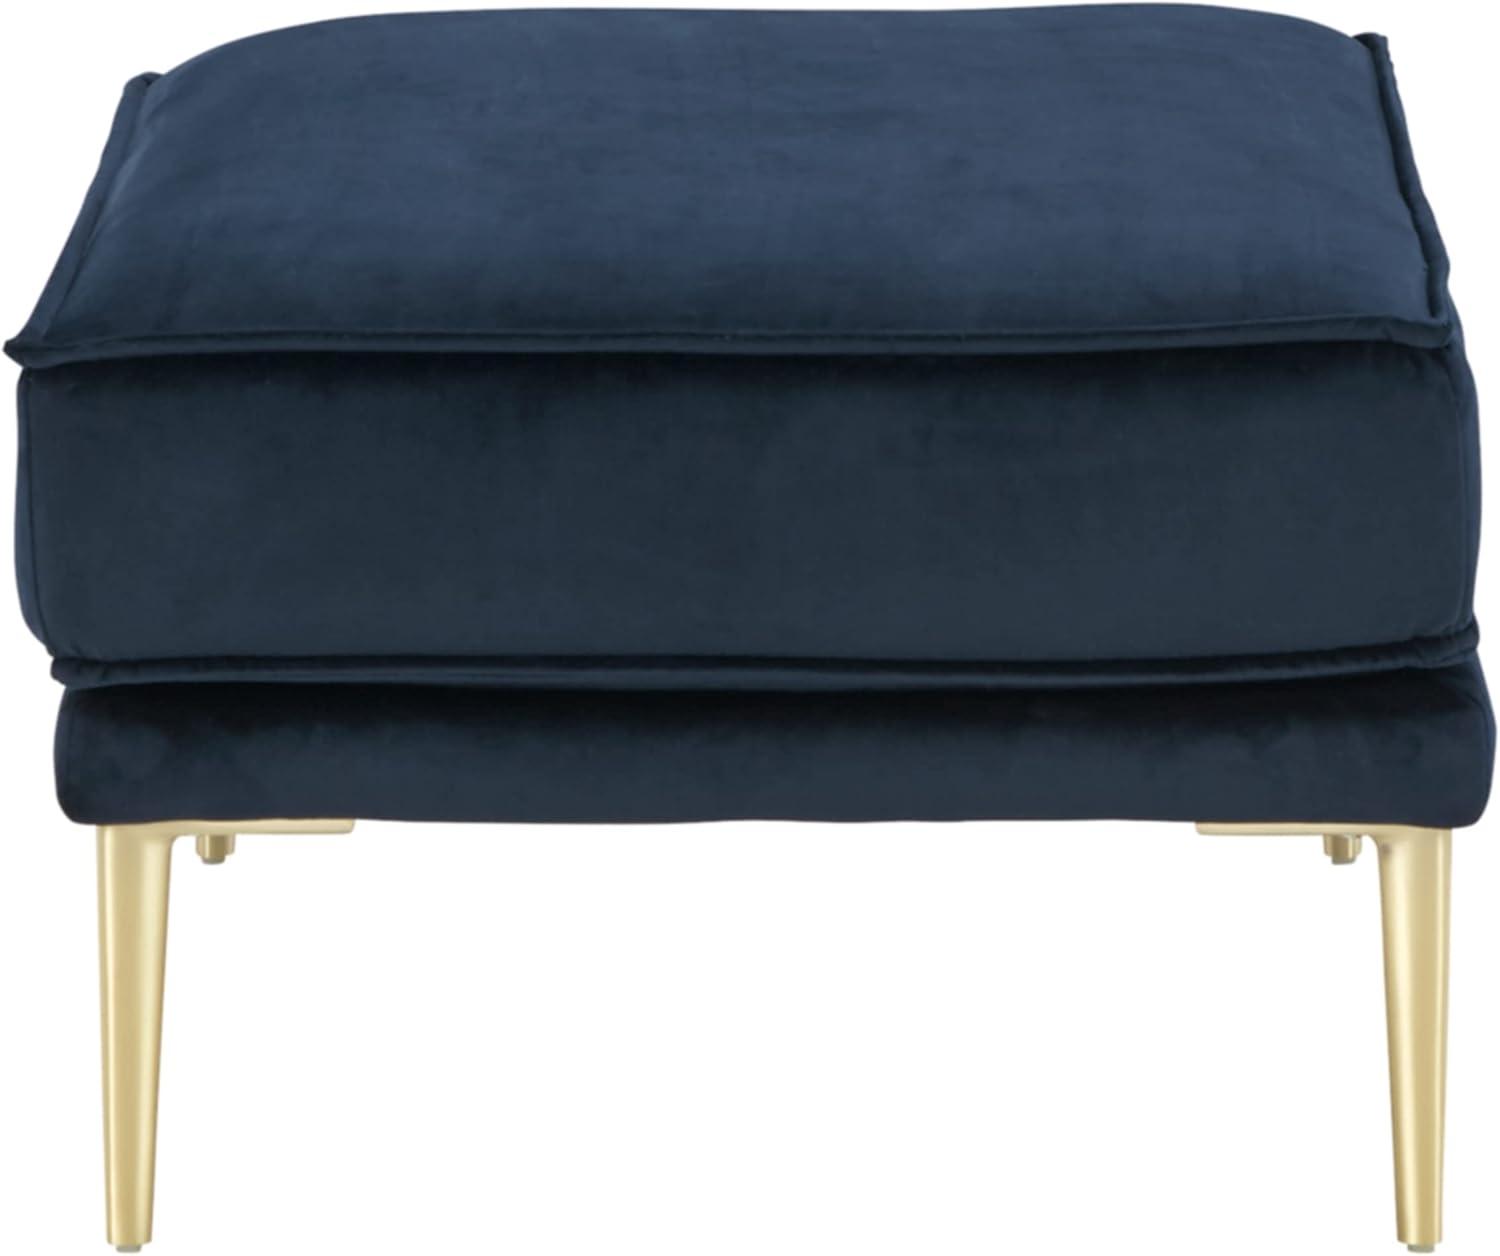 Macleary 29.5" Navy Blue Velvet Ottoman with Brass-Tone Metal Legs